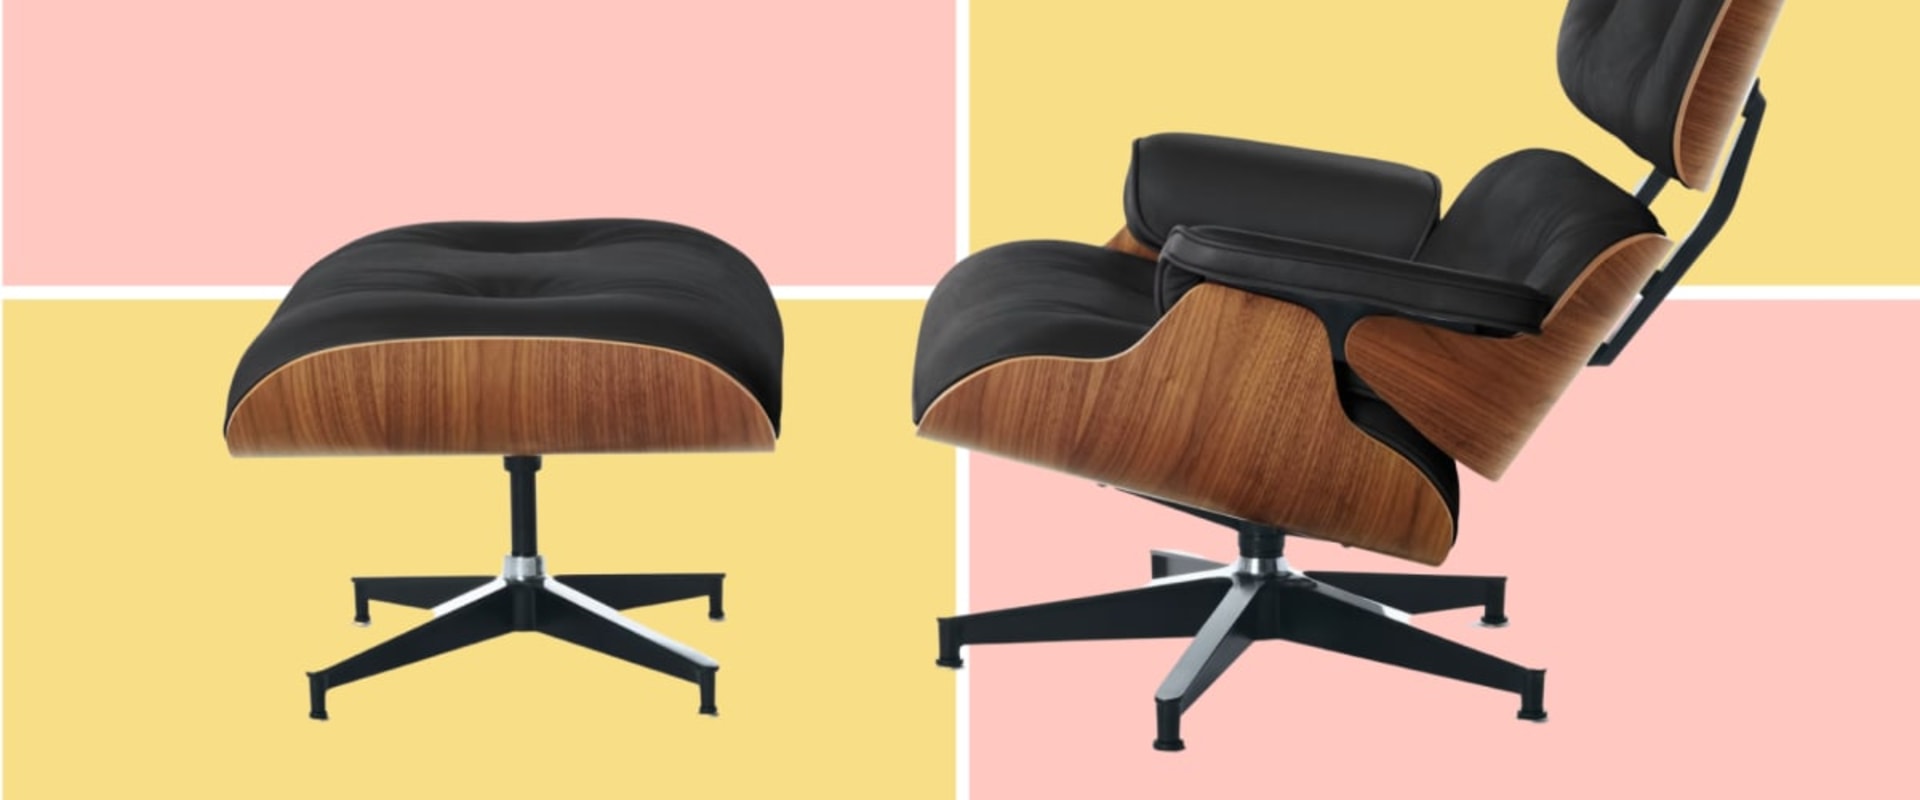 Eames Office Chair Replica: Quality Reviews from an Expert